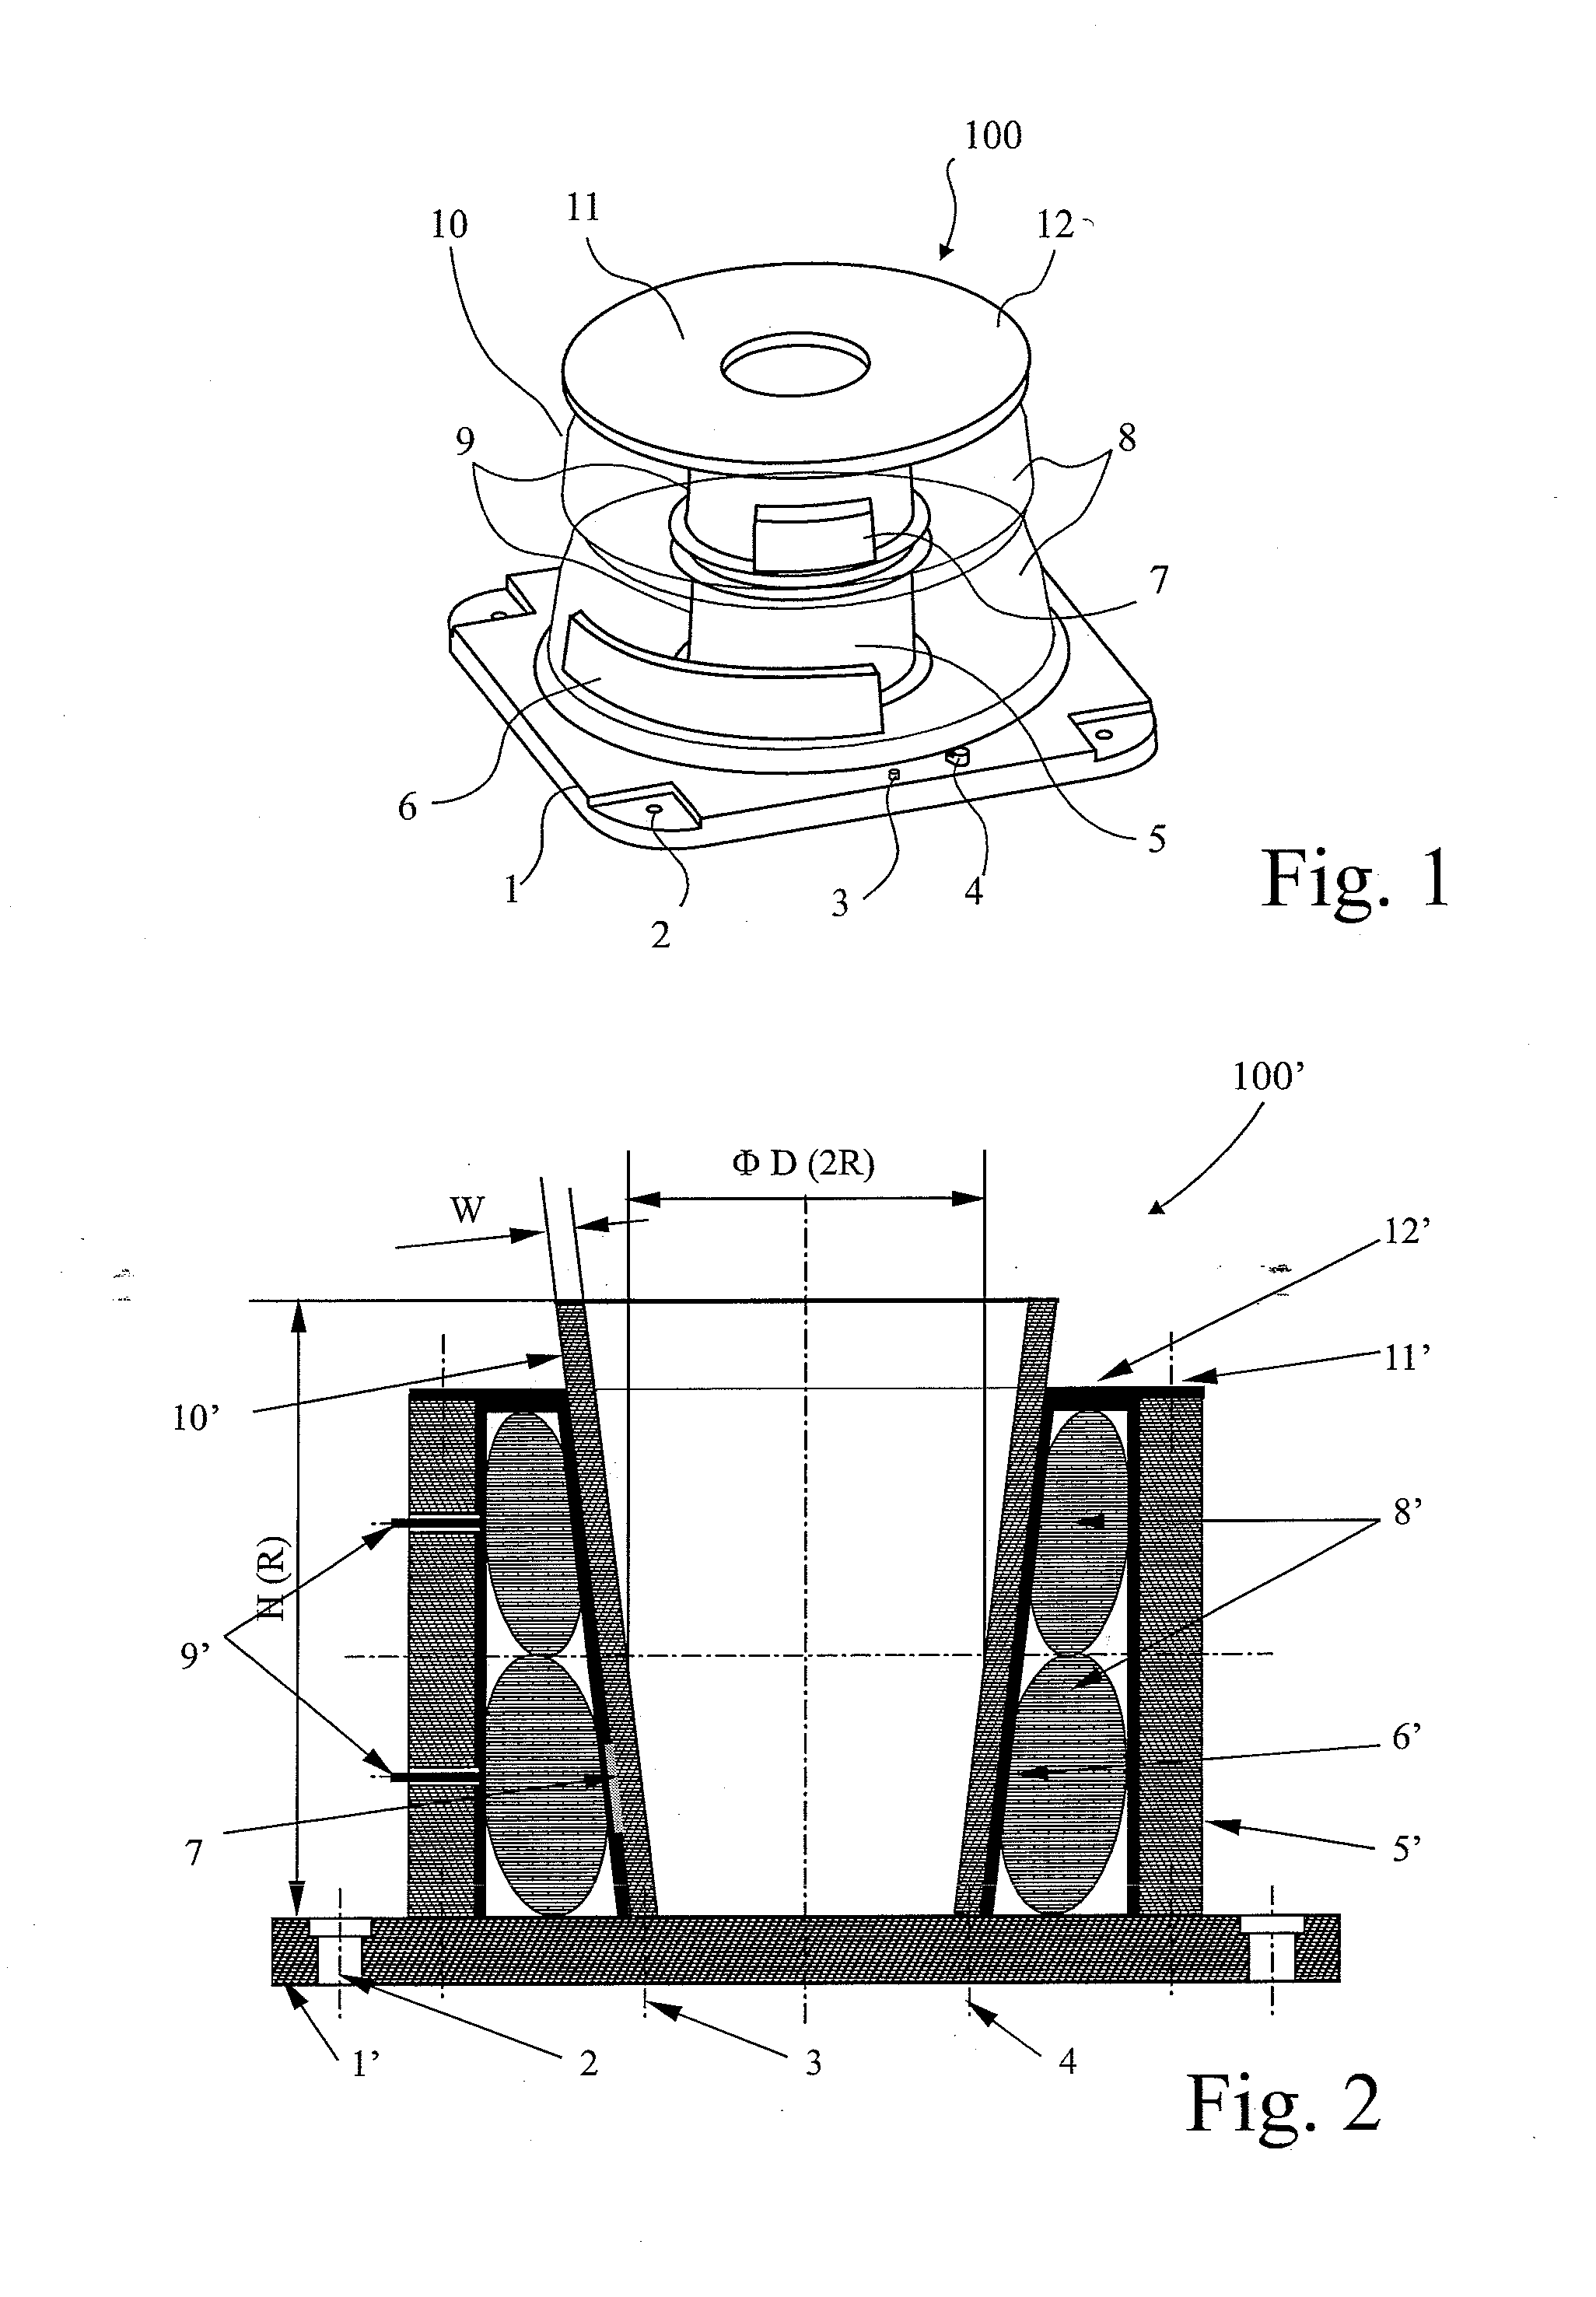 Adaptive design of fixture for thin-walled shell/cylindrical components